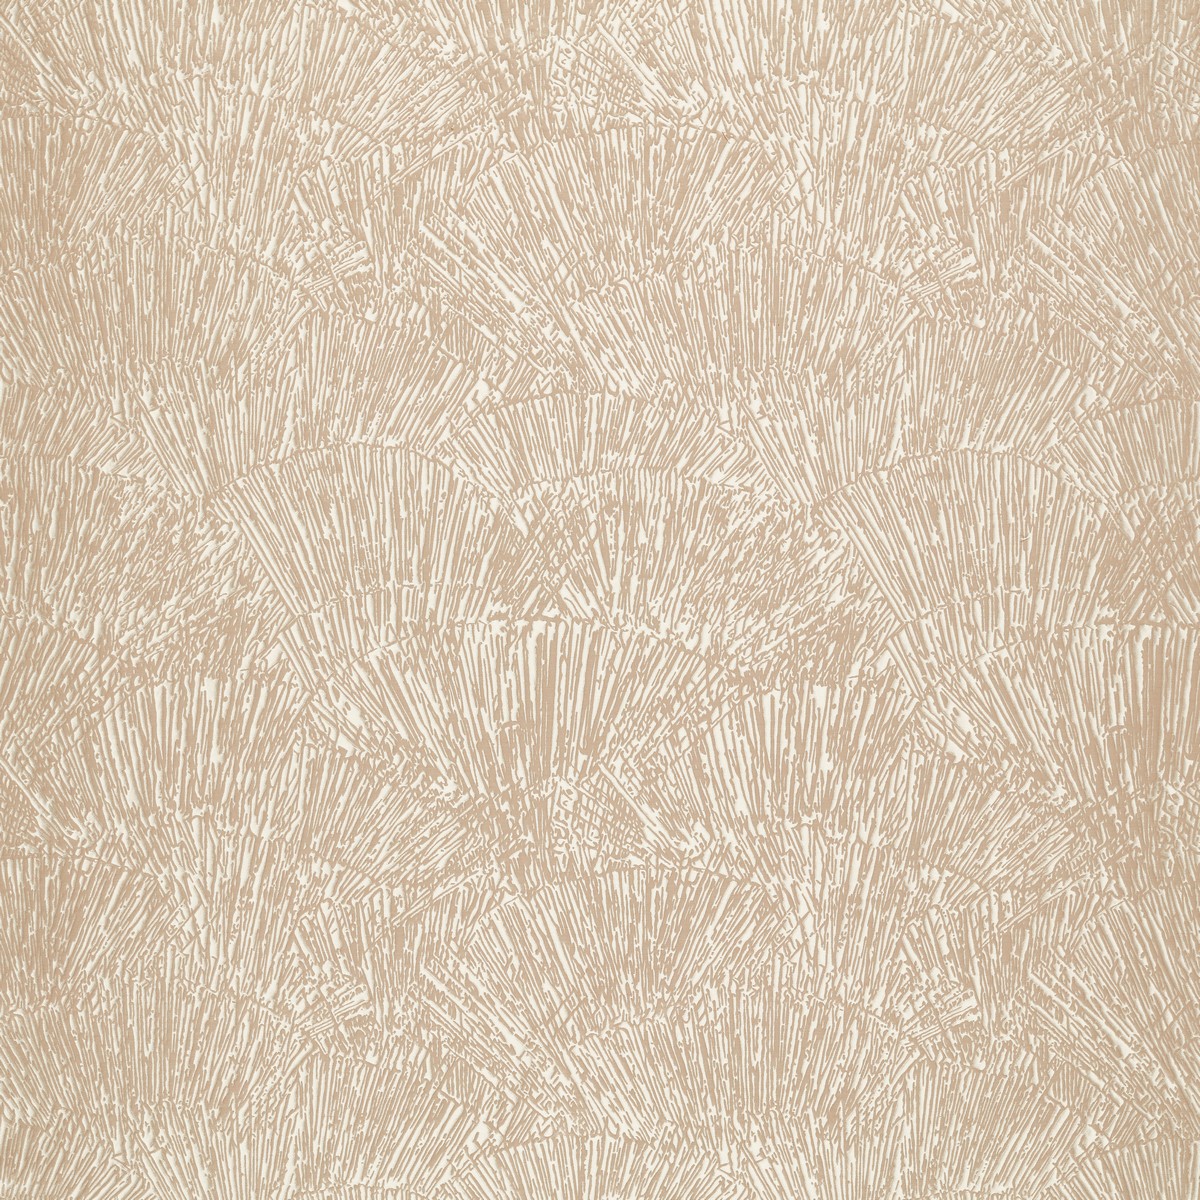 Tessen Parchment Fabric by Harlequin